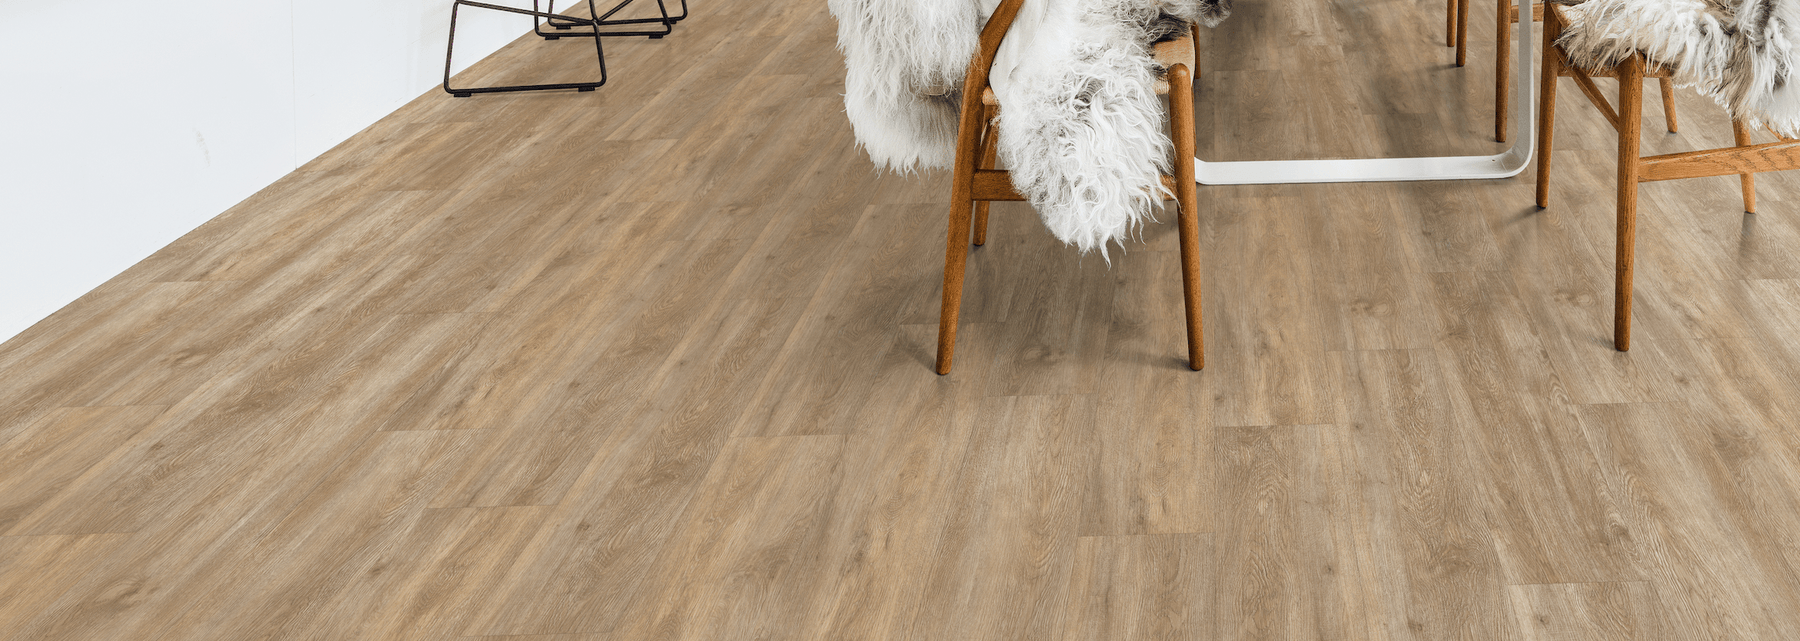 10% off products and services at Arc Floor - HomesToLife